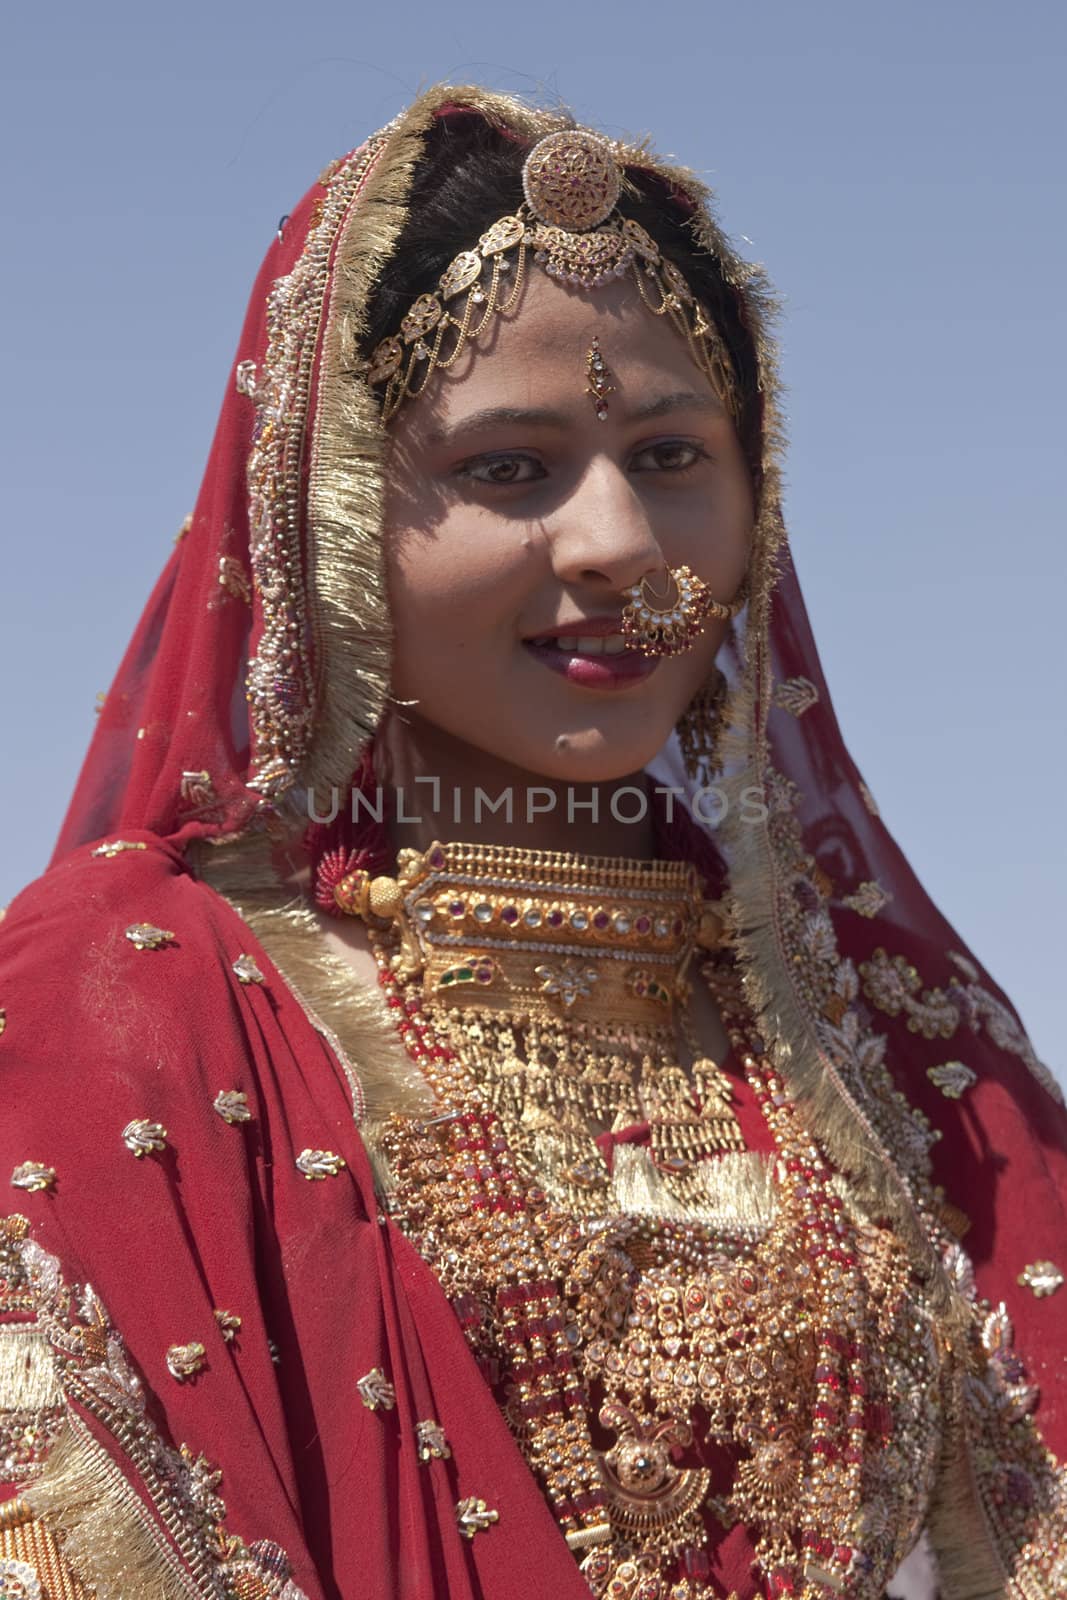 Indian lady dressed in ornate red sari and adorned with traditional Indian jewellery in Jaisalmer, Rajasthan, India.